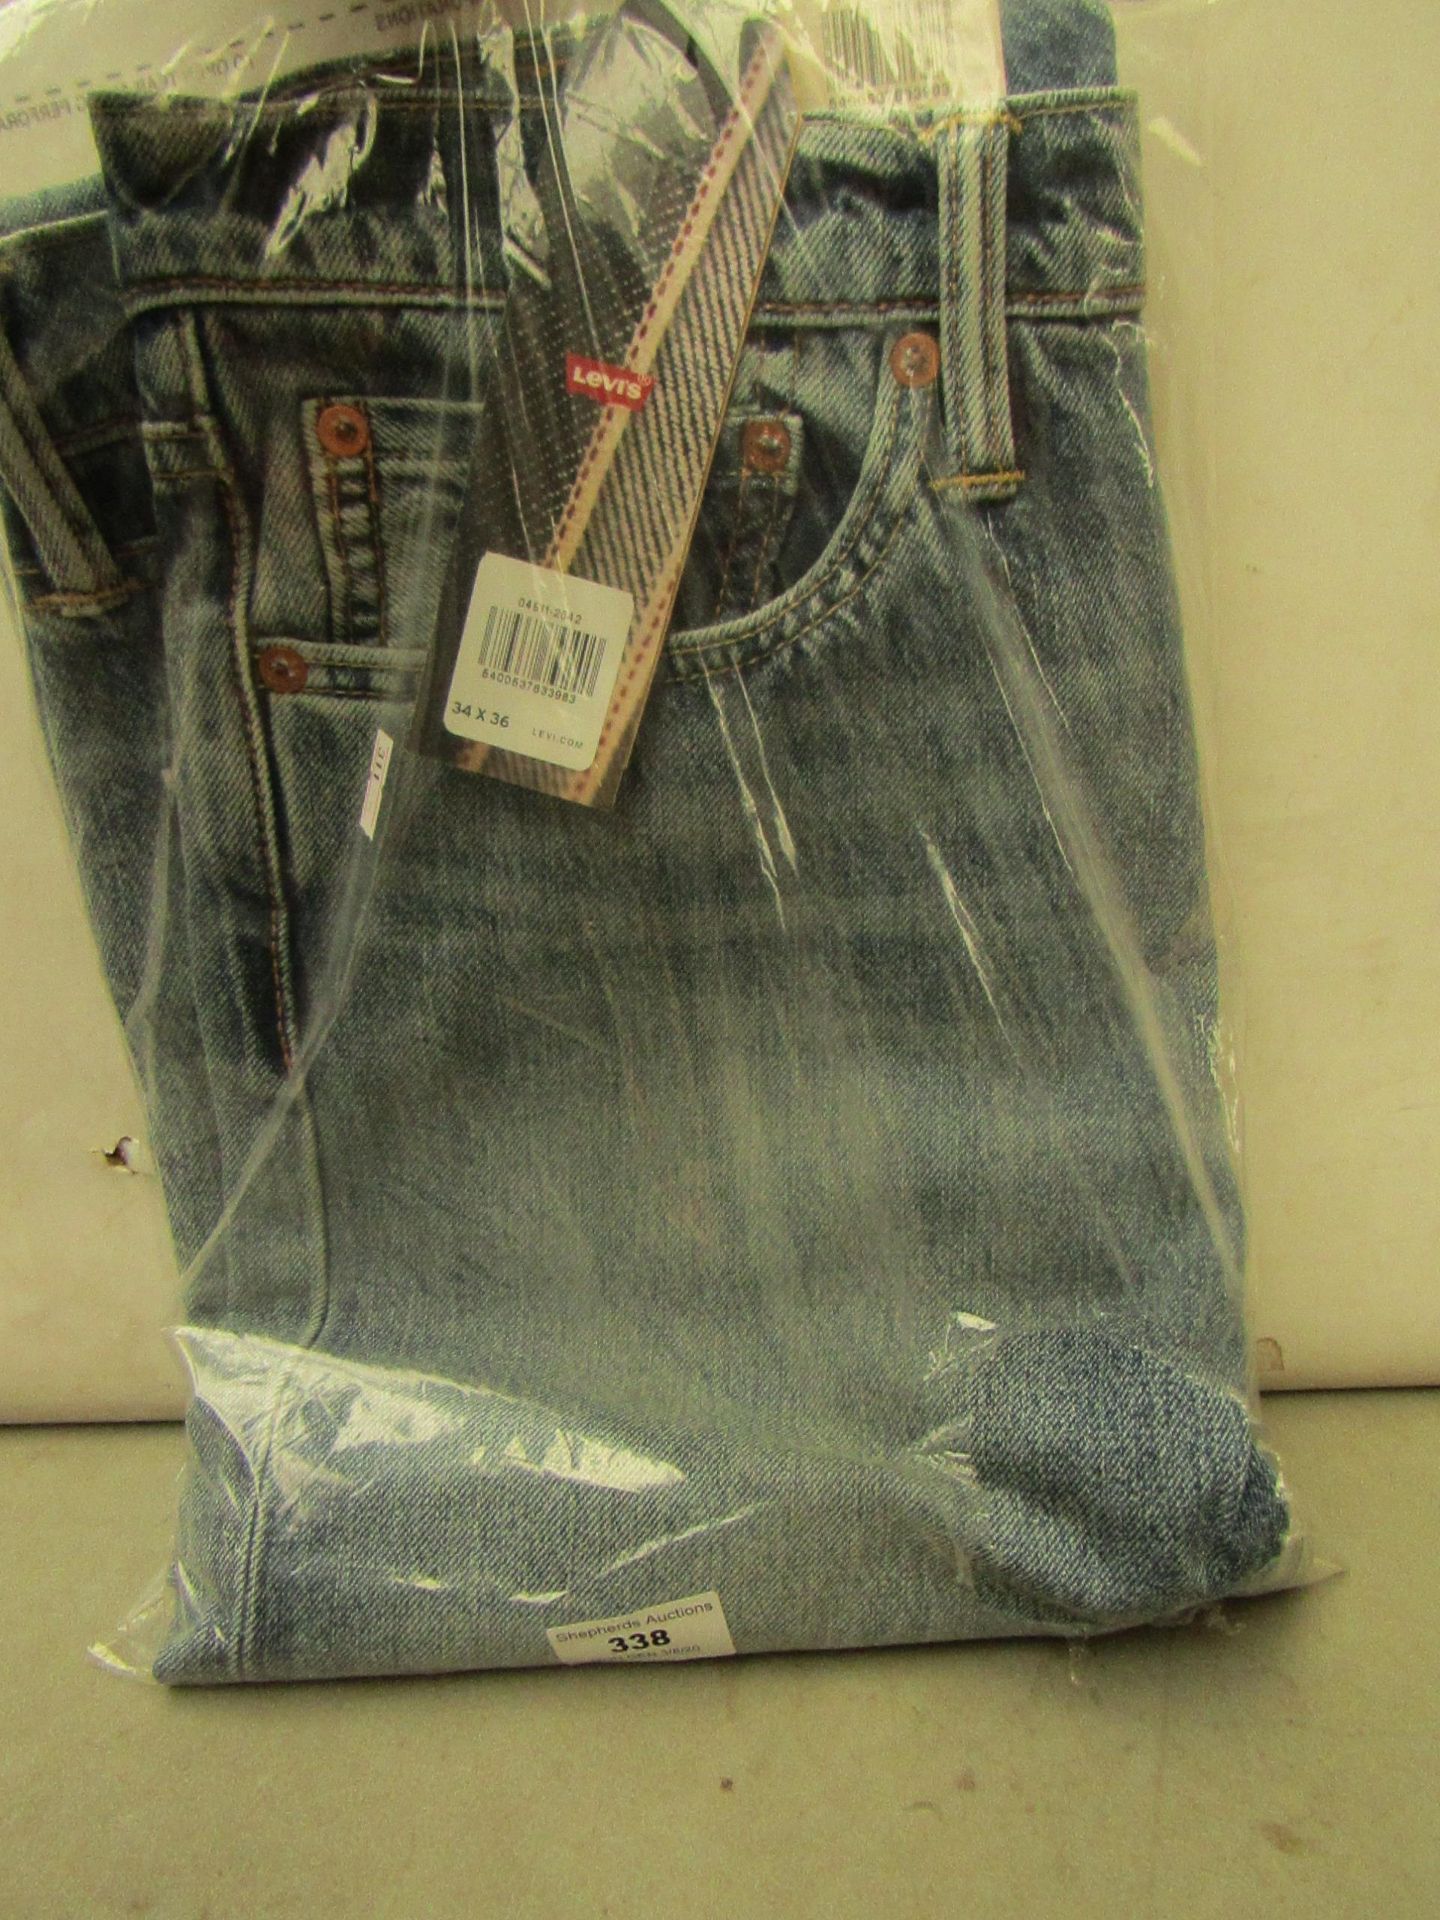 Levis Jeans. Size 34W x 36L. Look new with tags & Packaged